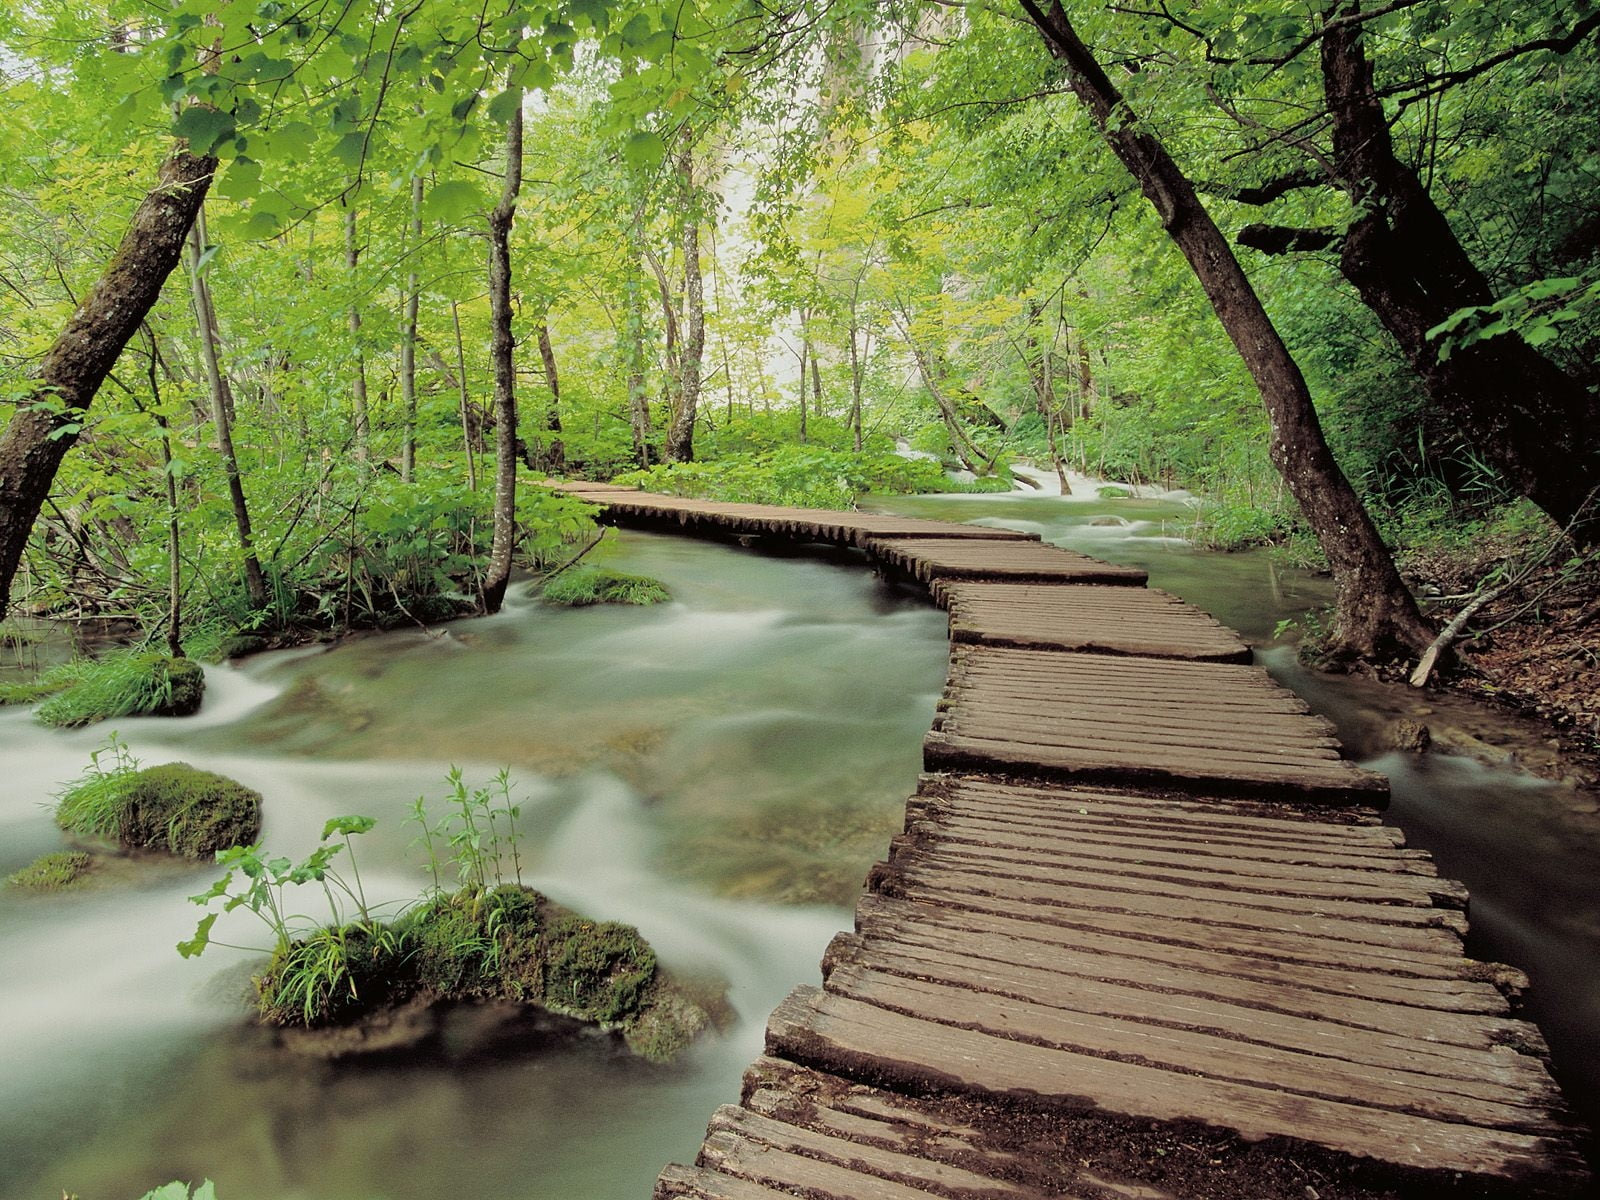 Brown Wooden Pathway Above River Surrounded By Green Trees During